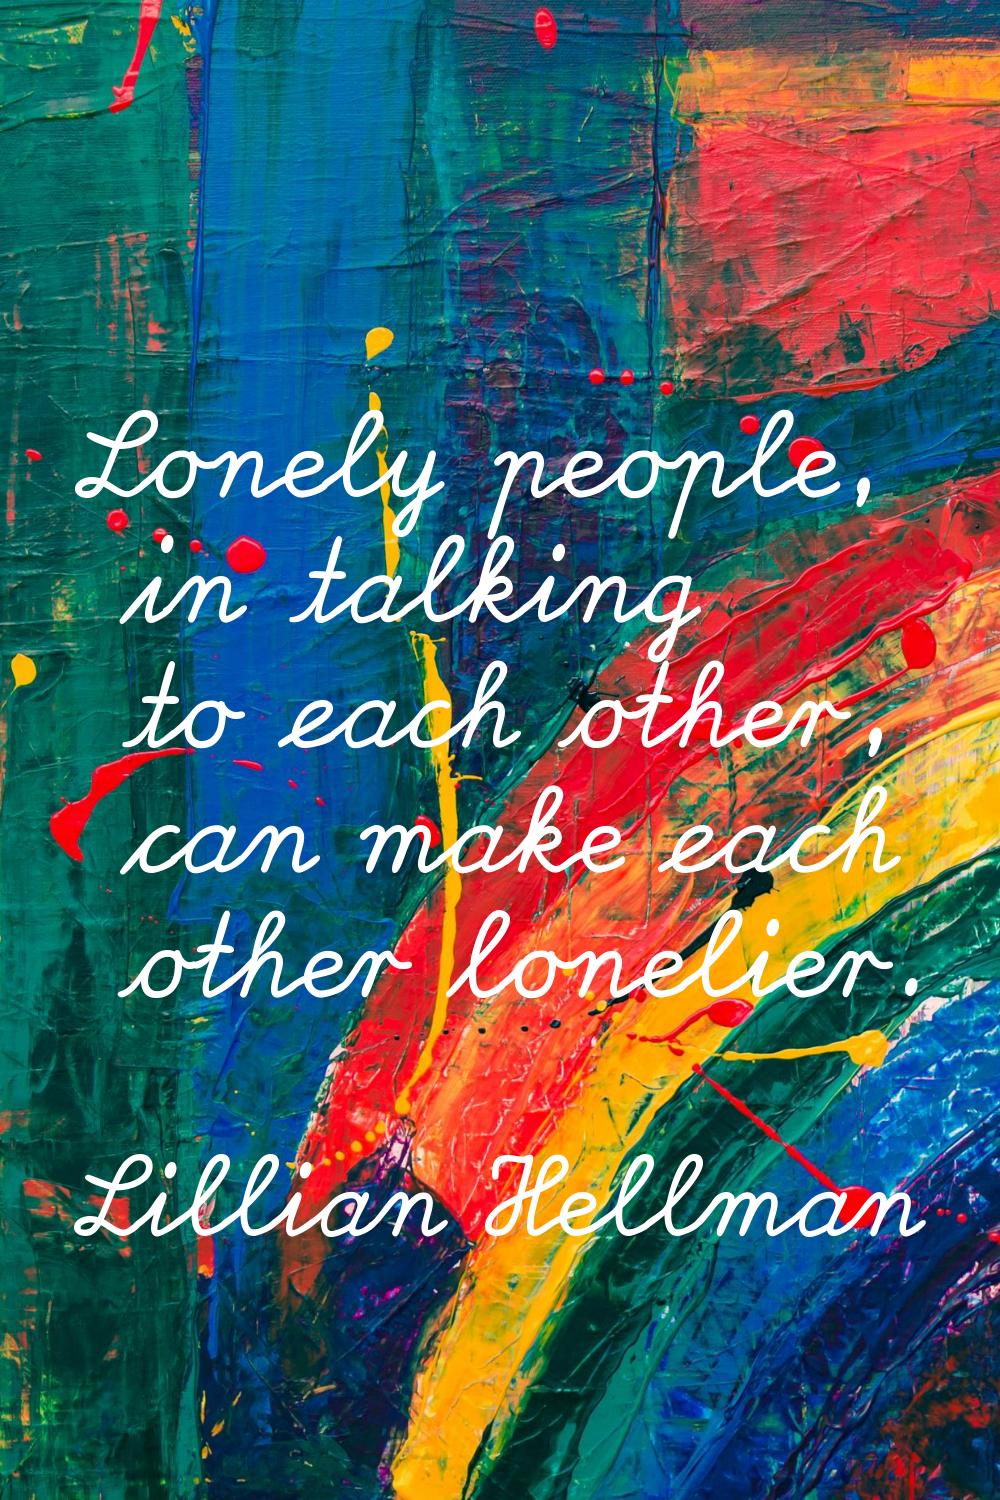 Lonely people, in talking to each other, can make each other lonelier.